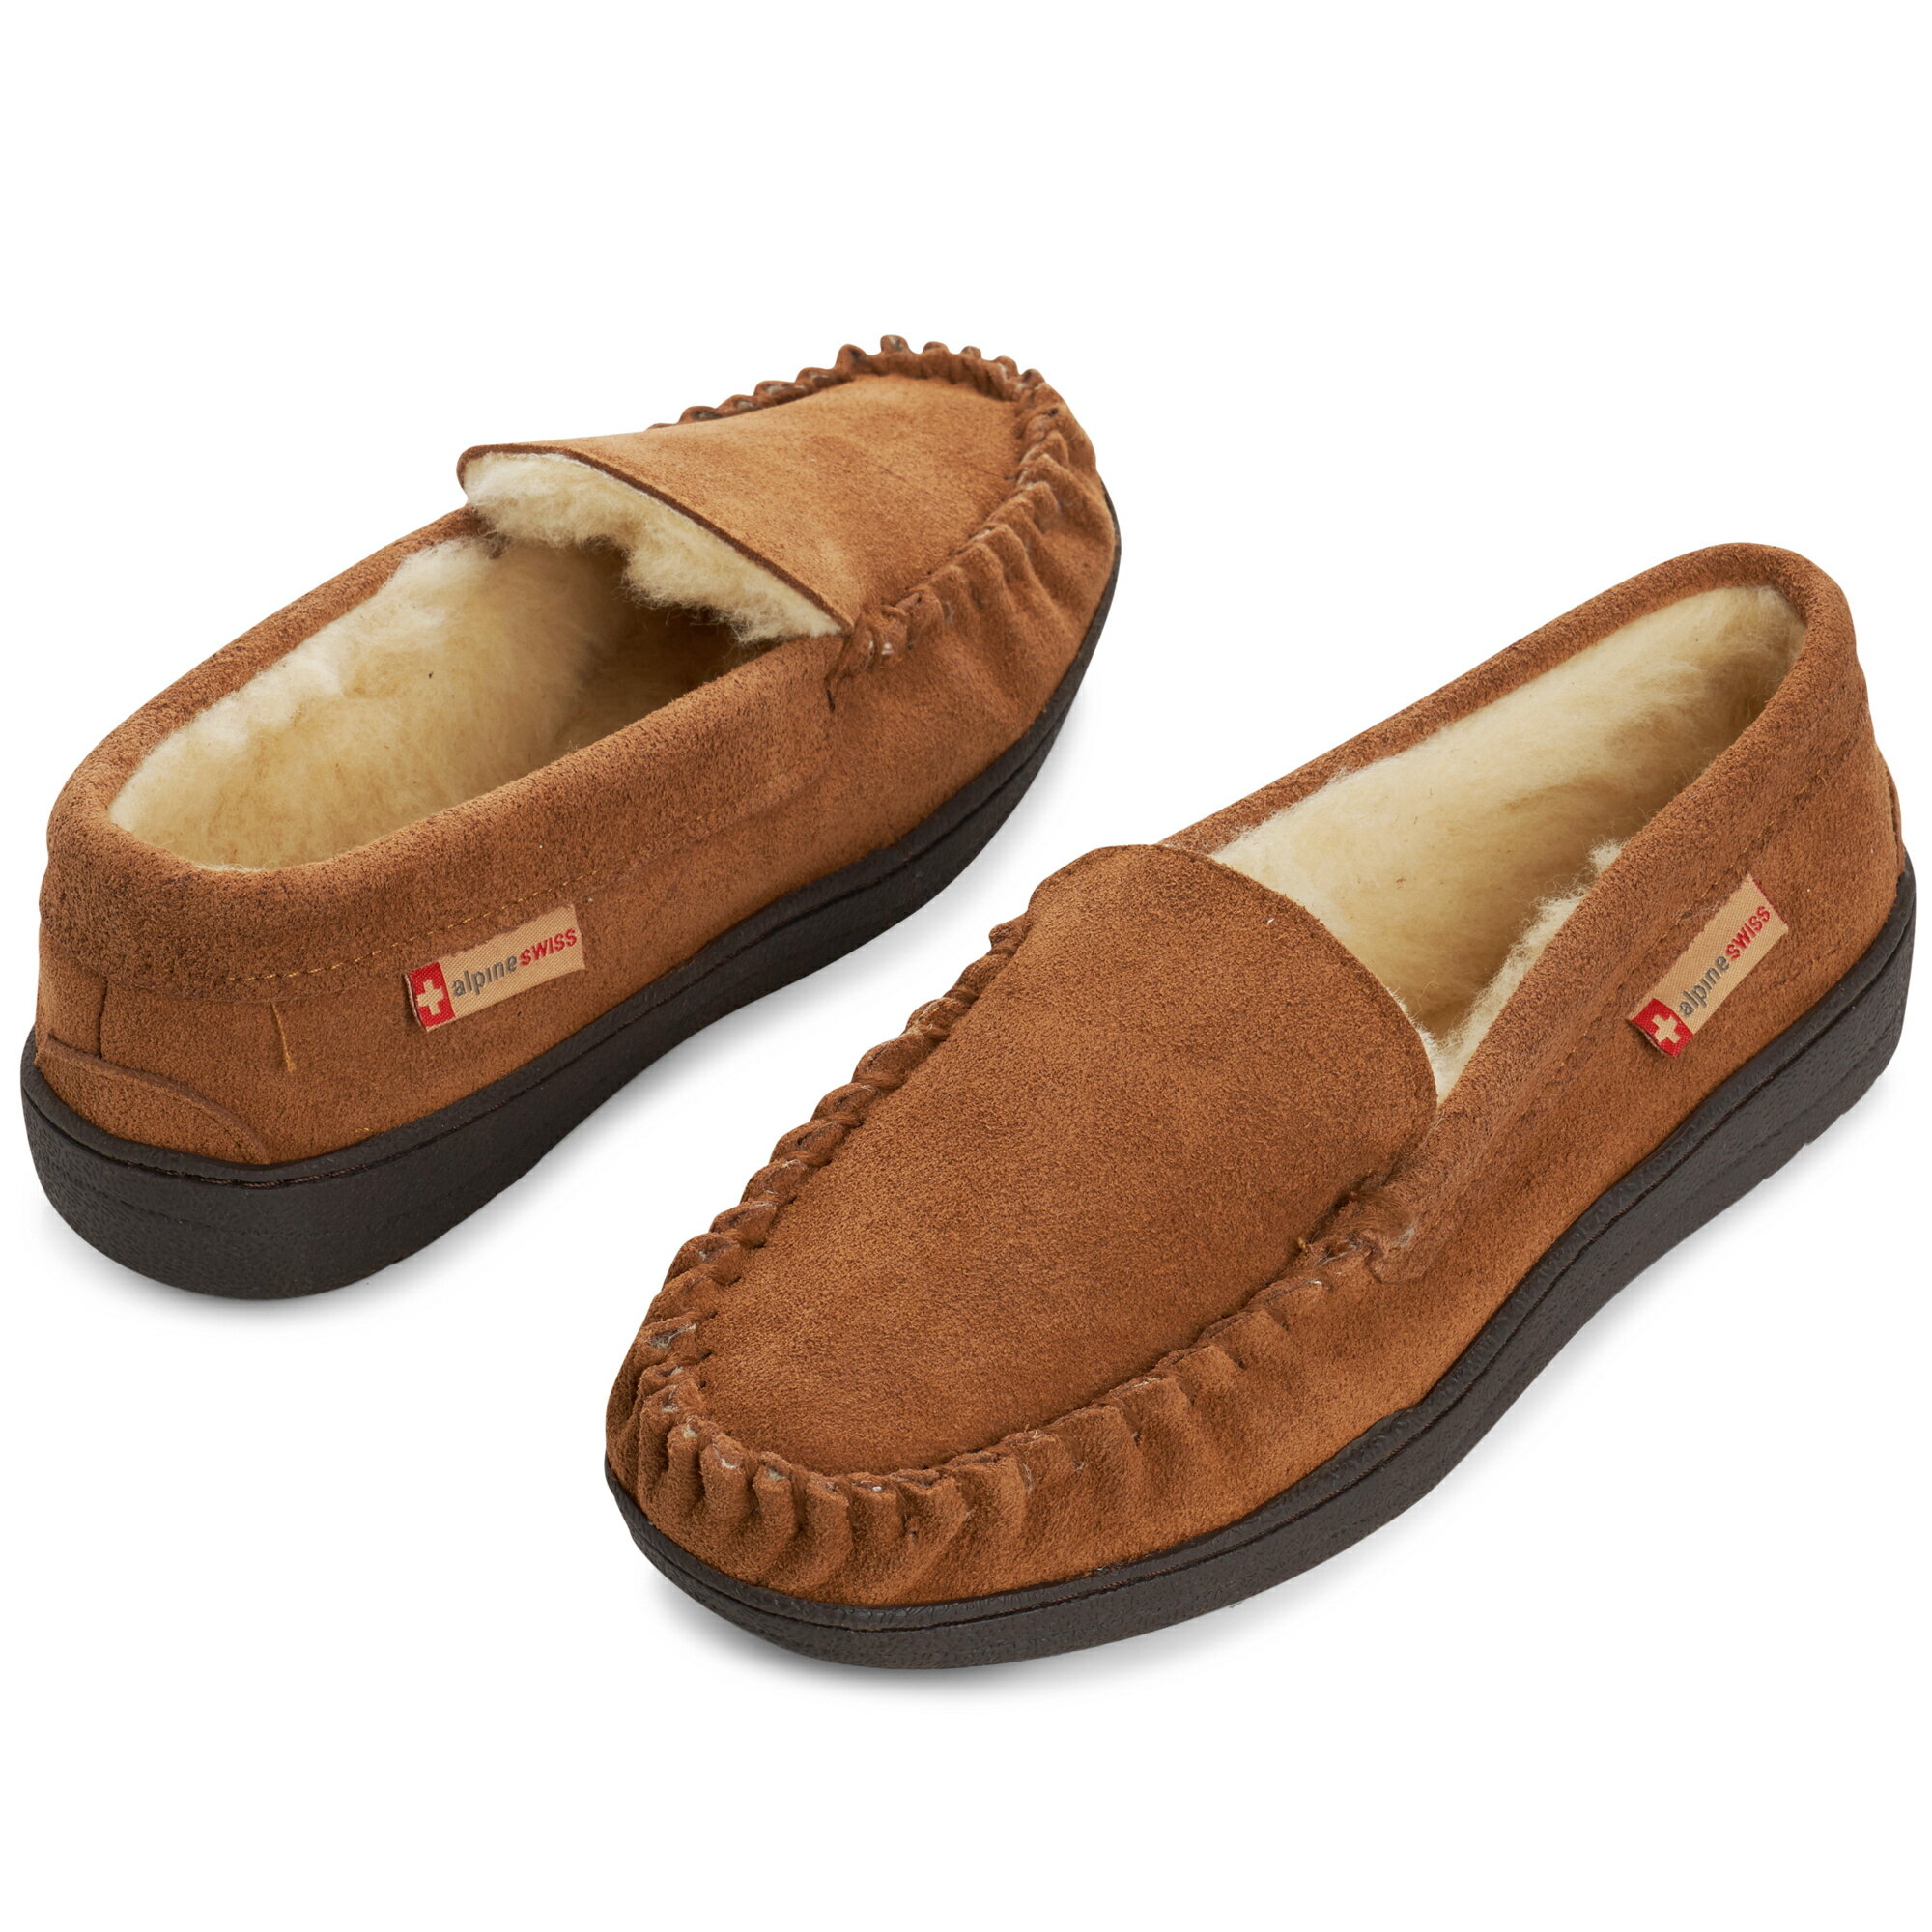 Mens Suede Shearling Moccasin Slippers 